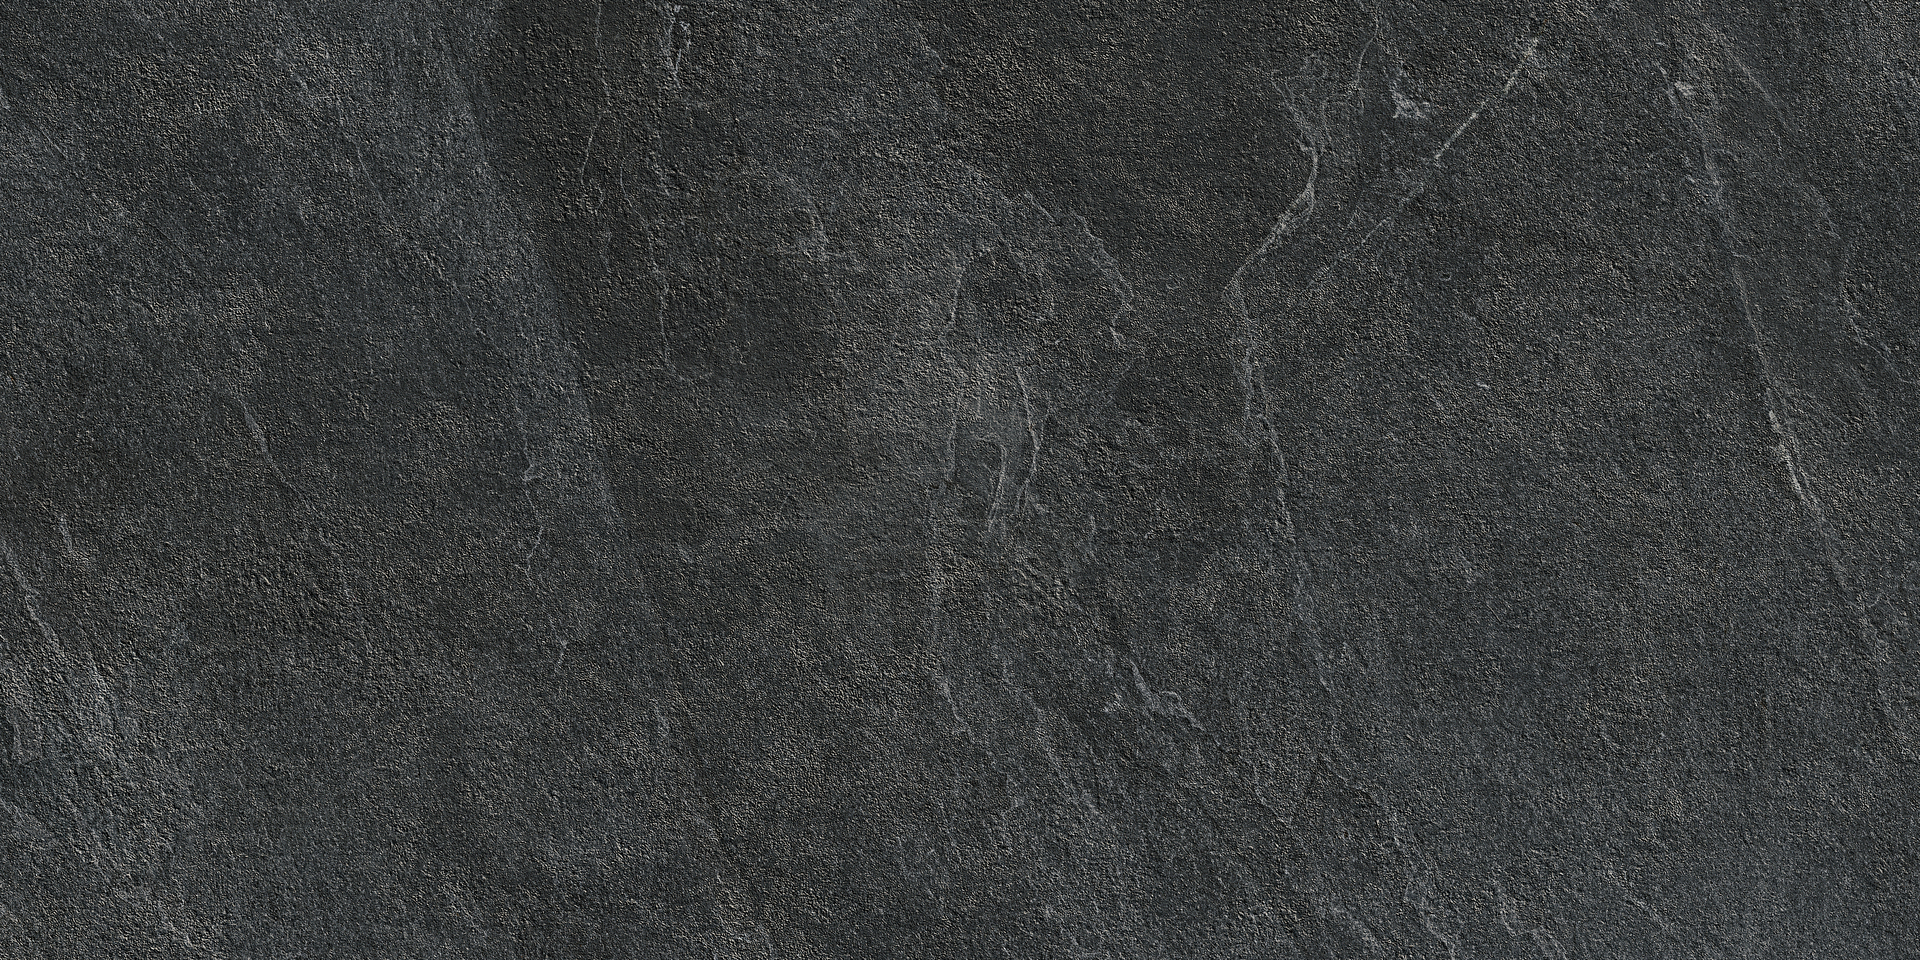 Panaria Zero.3 Stone Trace Abyss Antibacterial - Naturale PZXST00 60x120cm rectified 6mm